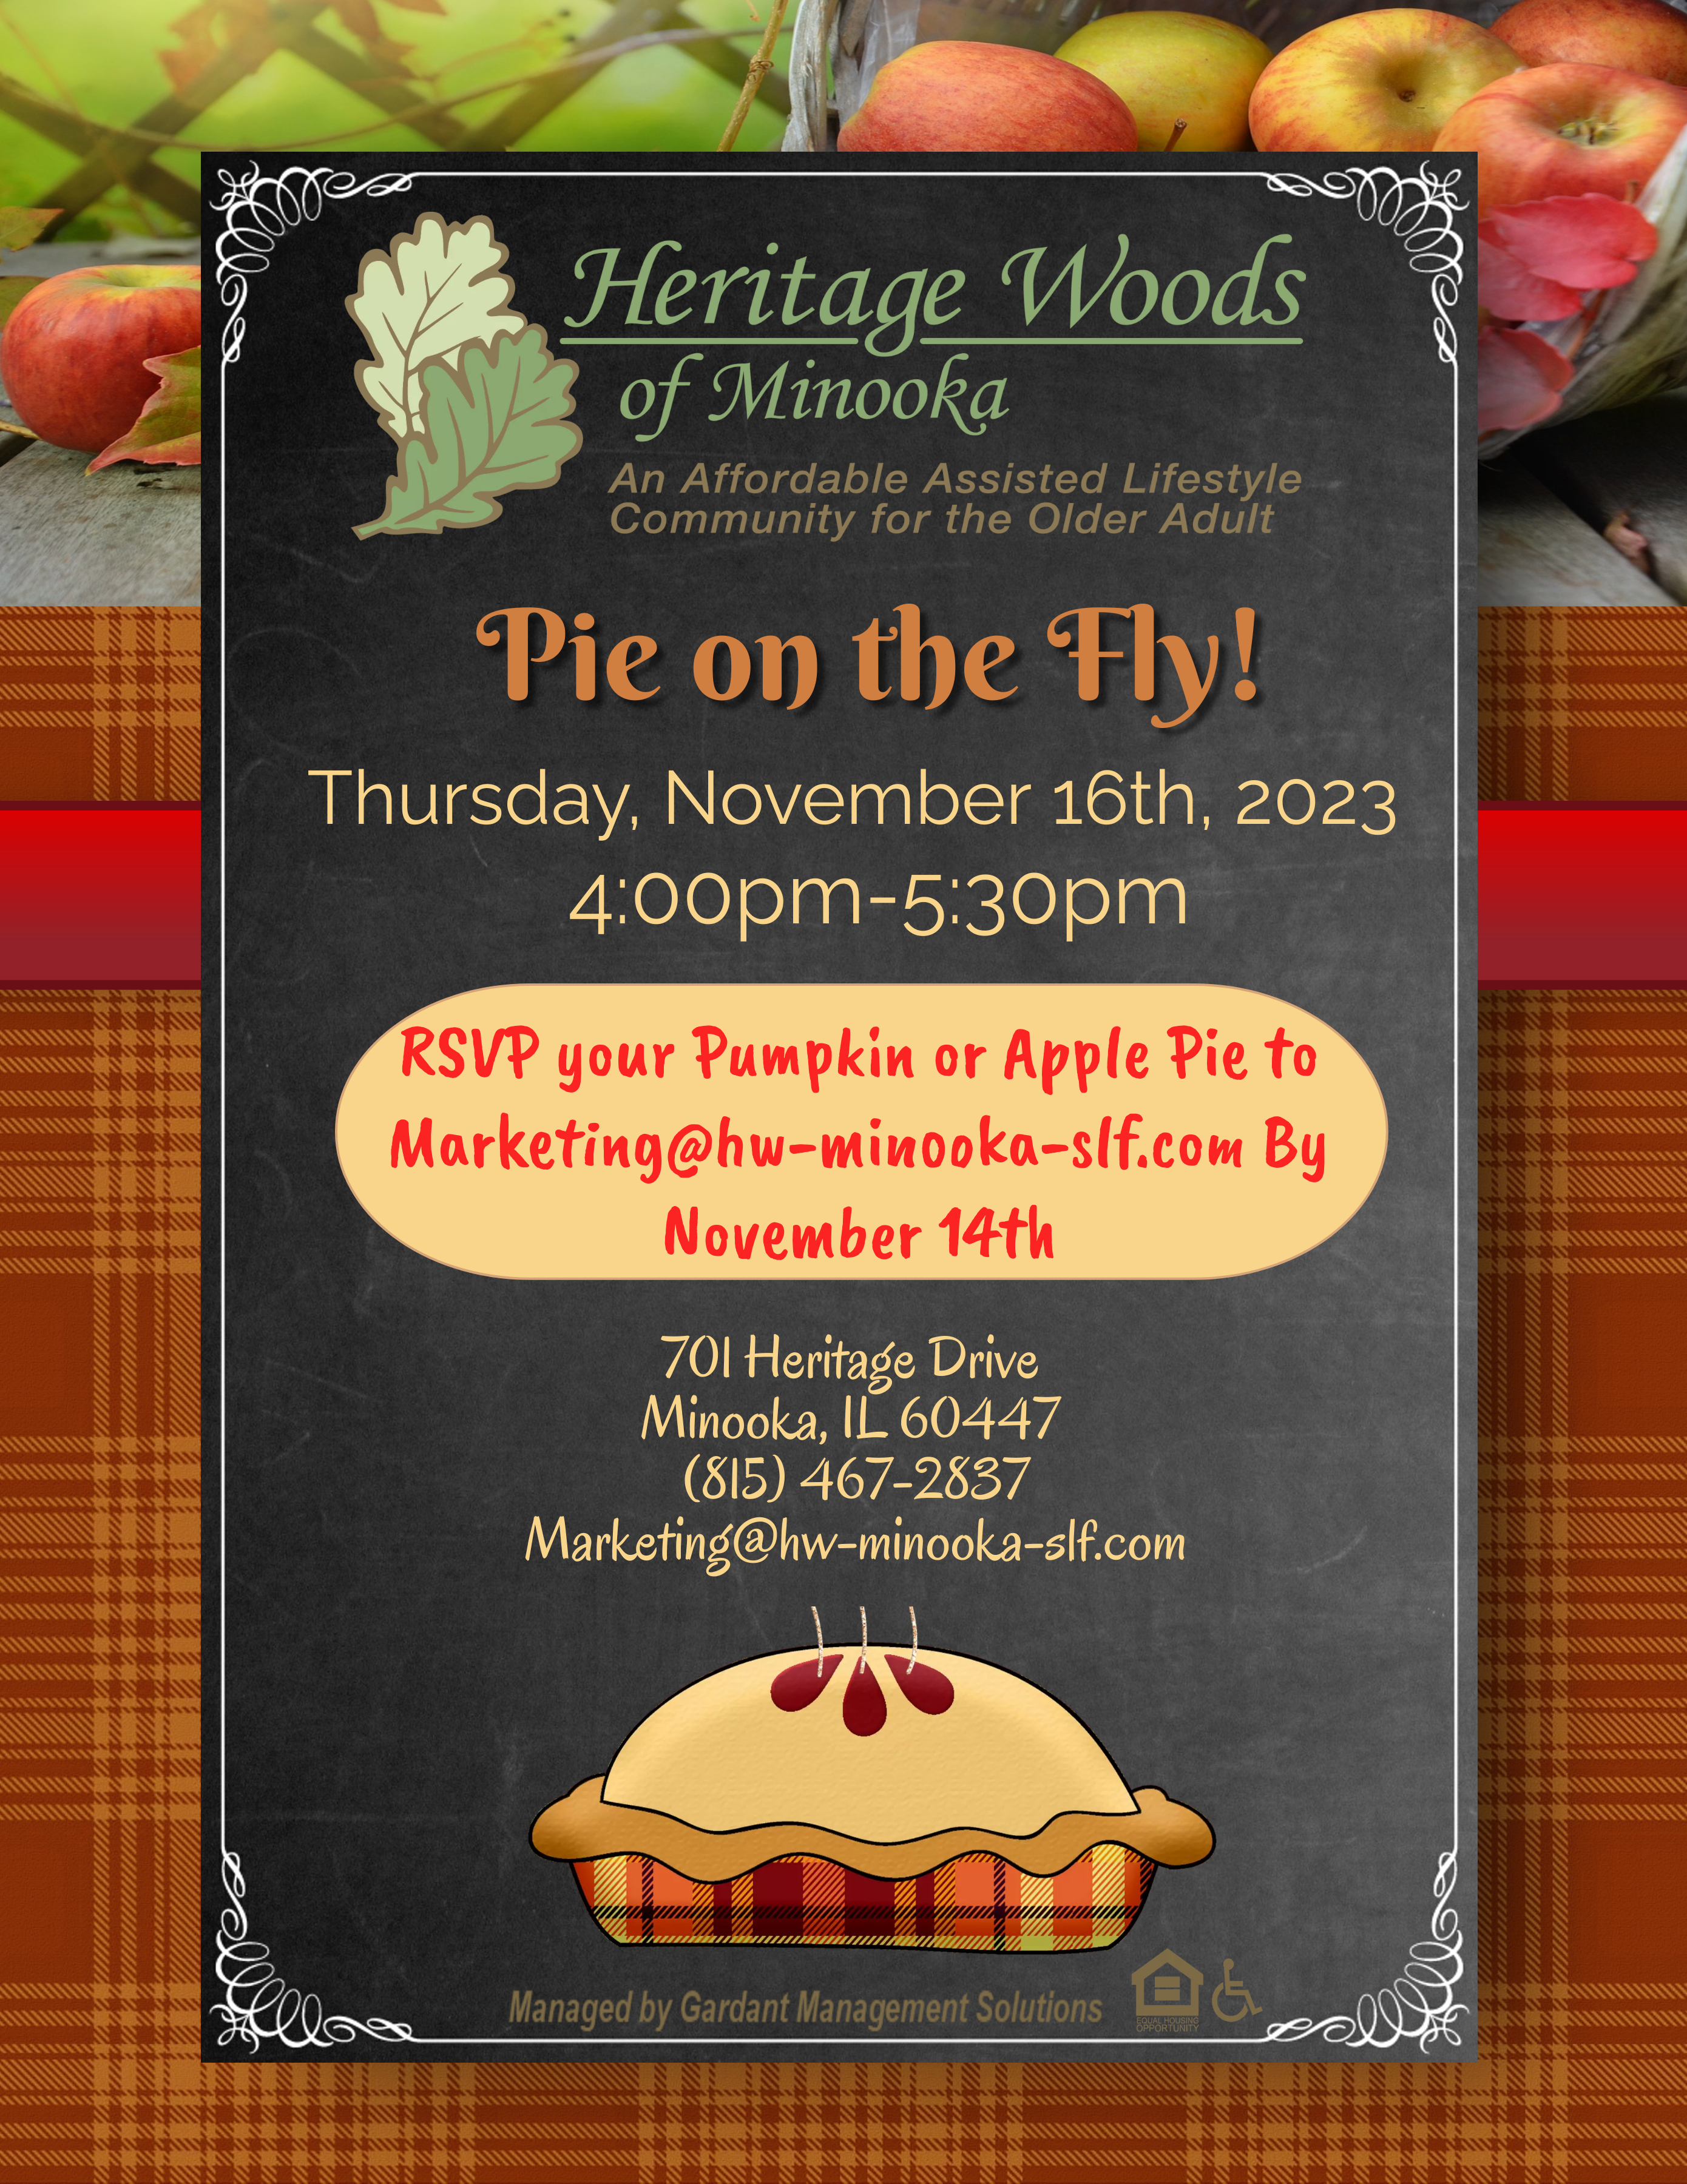 pie on the fly event information